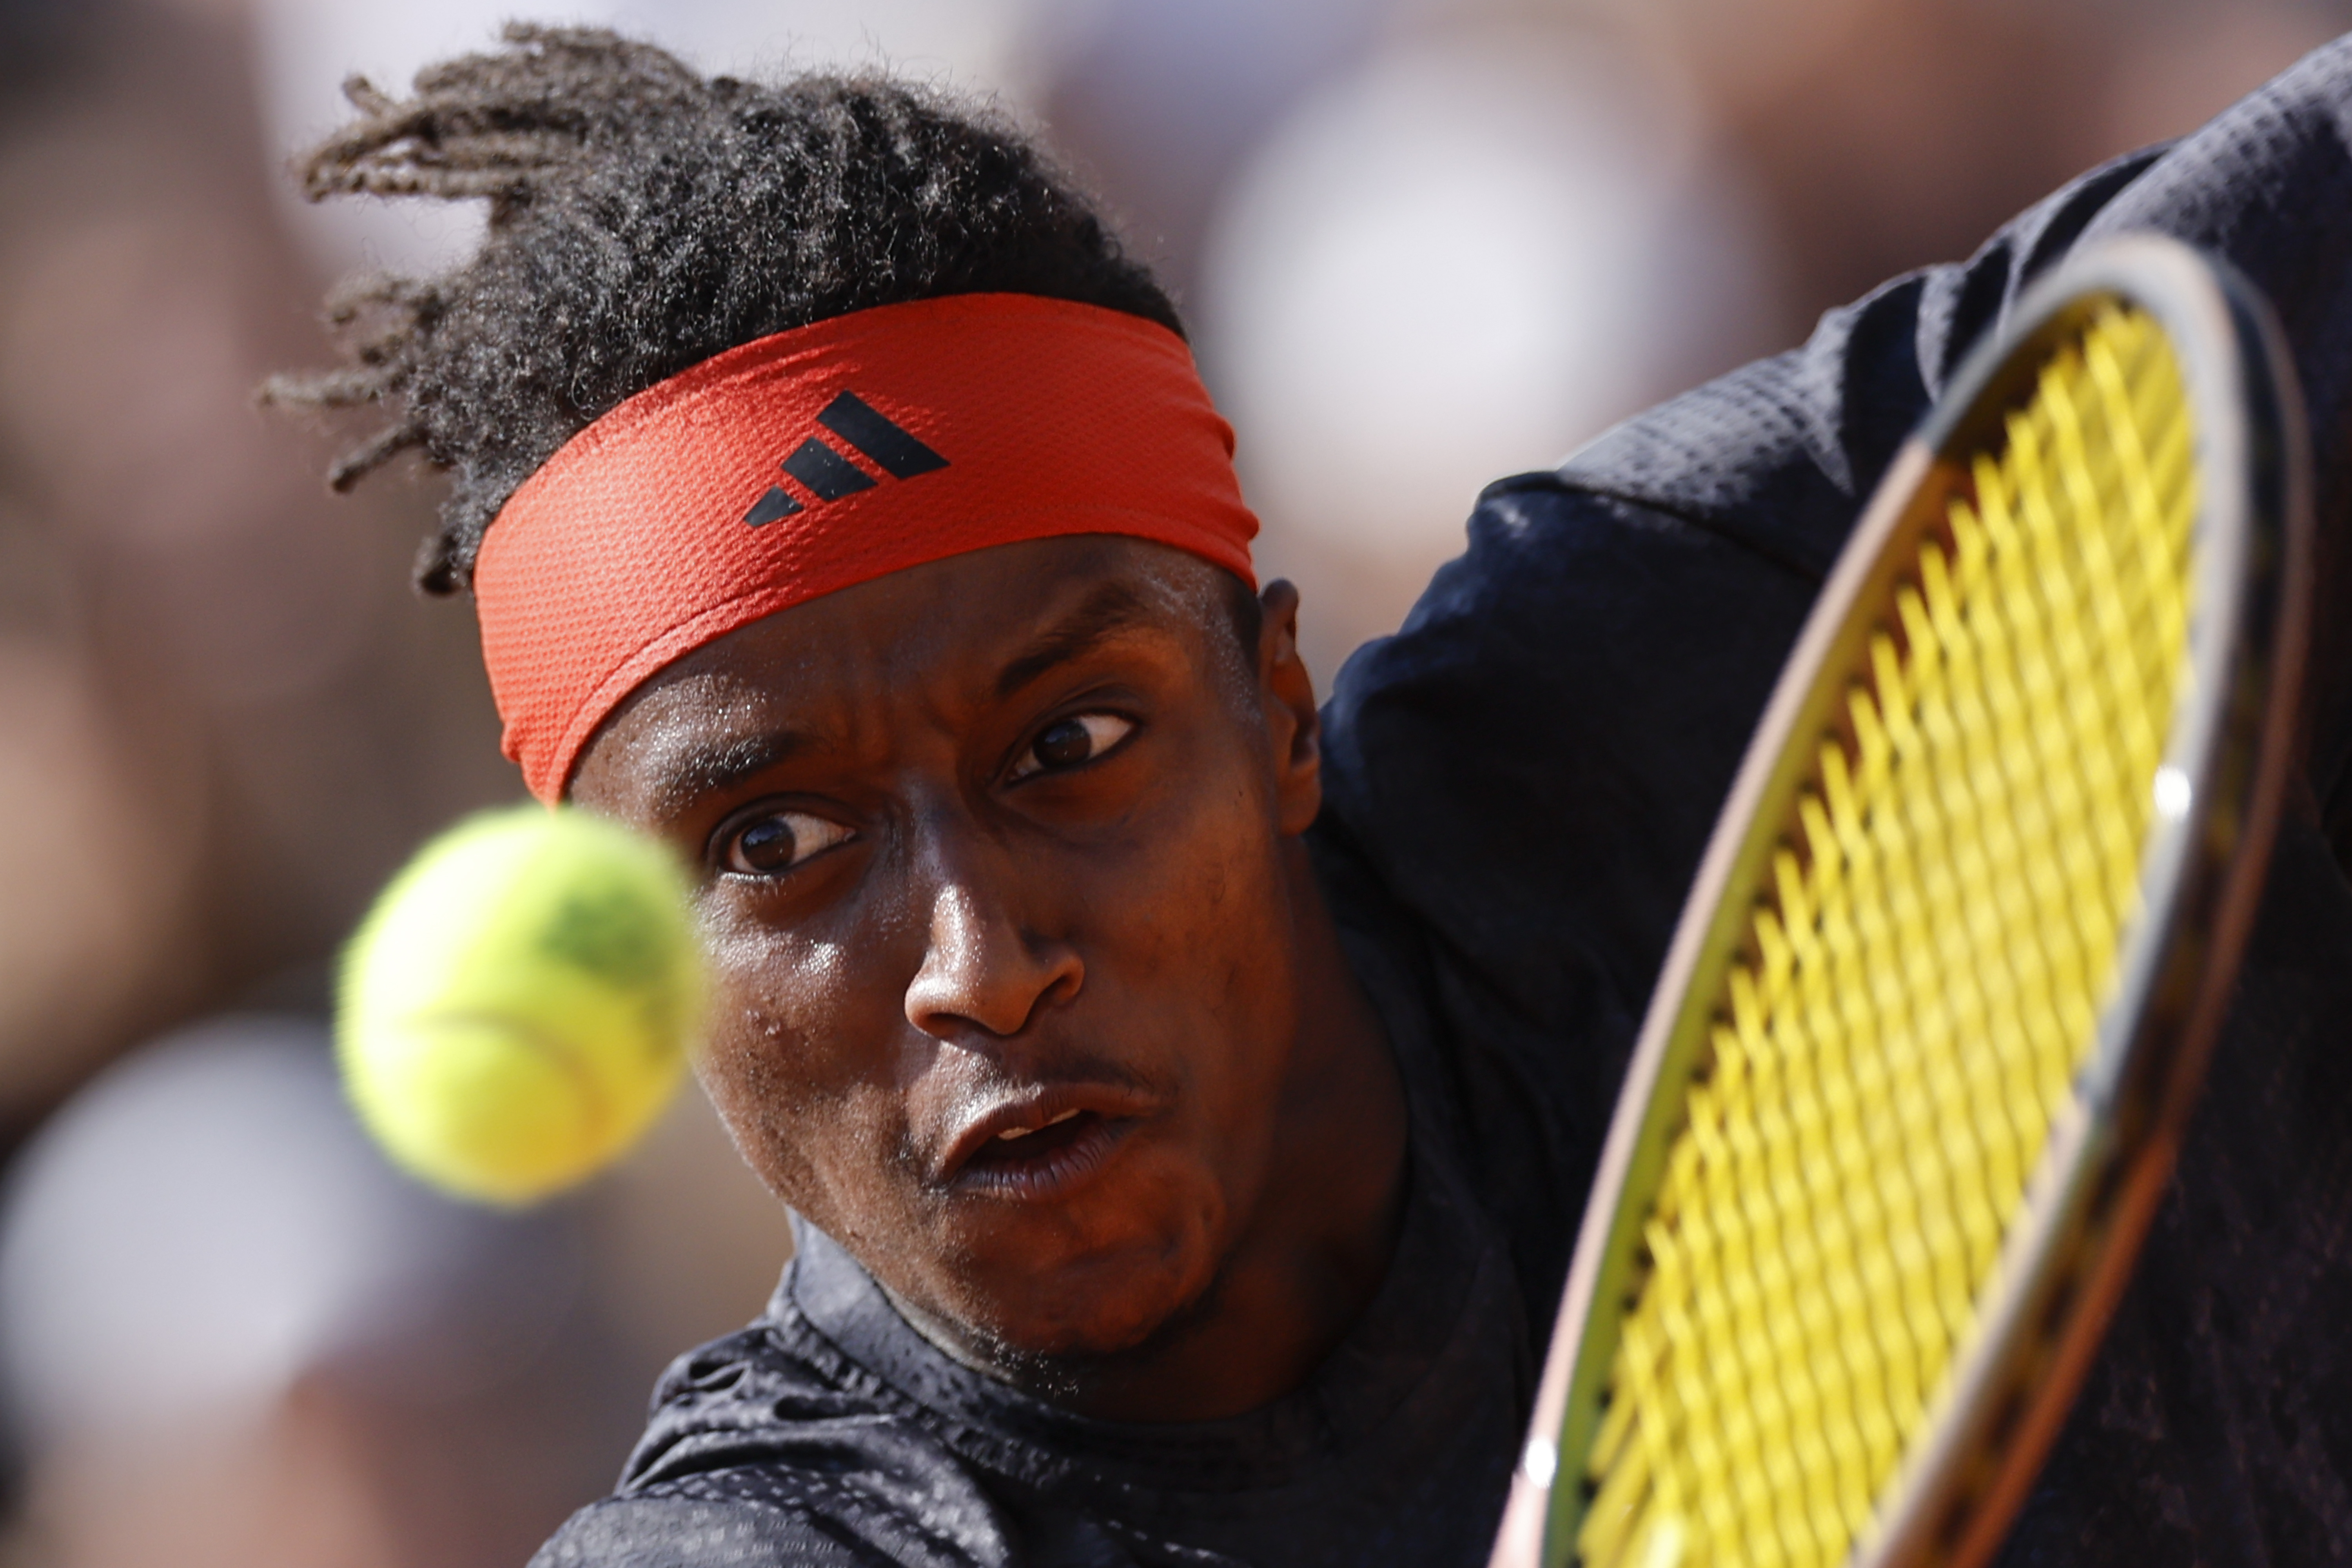 Mikael Ymer fined about $40K after default for hitting umpire stand with racket